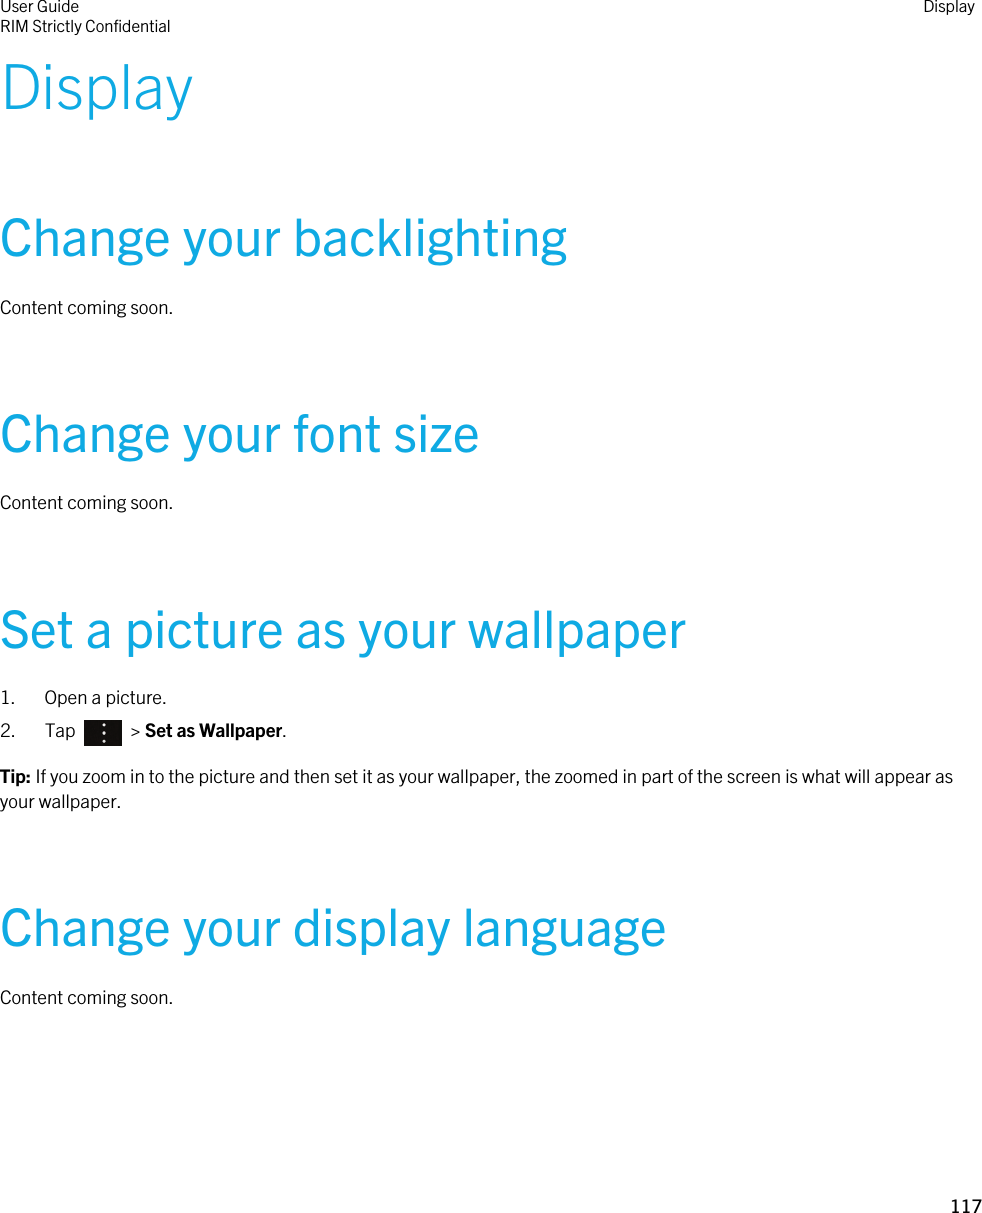 DisplayChange your backlightingContent coming soon.Change your font sizeContent coming soon.Set a picture as your wallpaper1. Open a picture.2.  Tap    &gt; Set as Wallpaper.Tip: If you zoom in to the picture and then set it as your wallpaper, the zoomed in part of the screen is what will appear as your wallpaper.Change your display languageContent coming soon.User GuideRIM Strictly Confidential Display117 